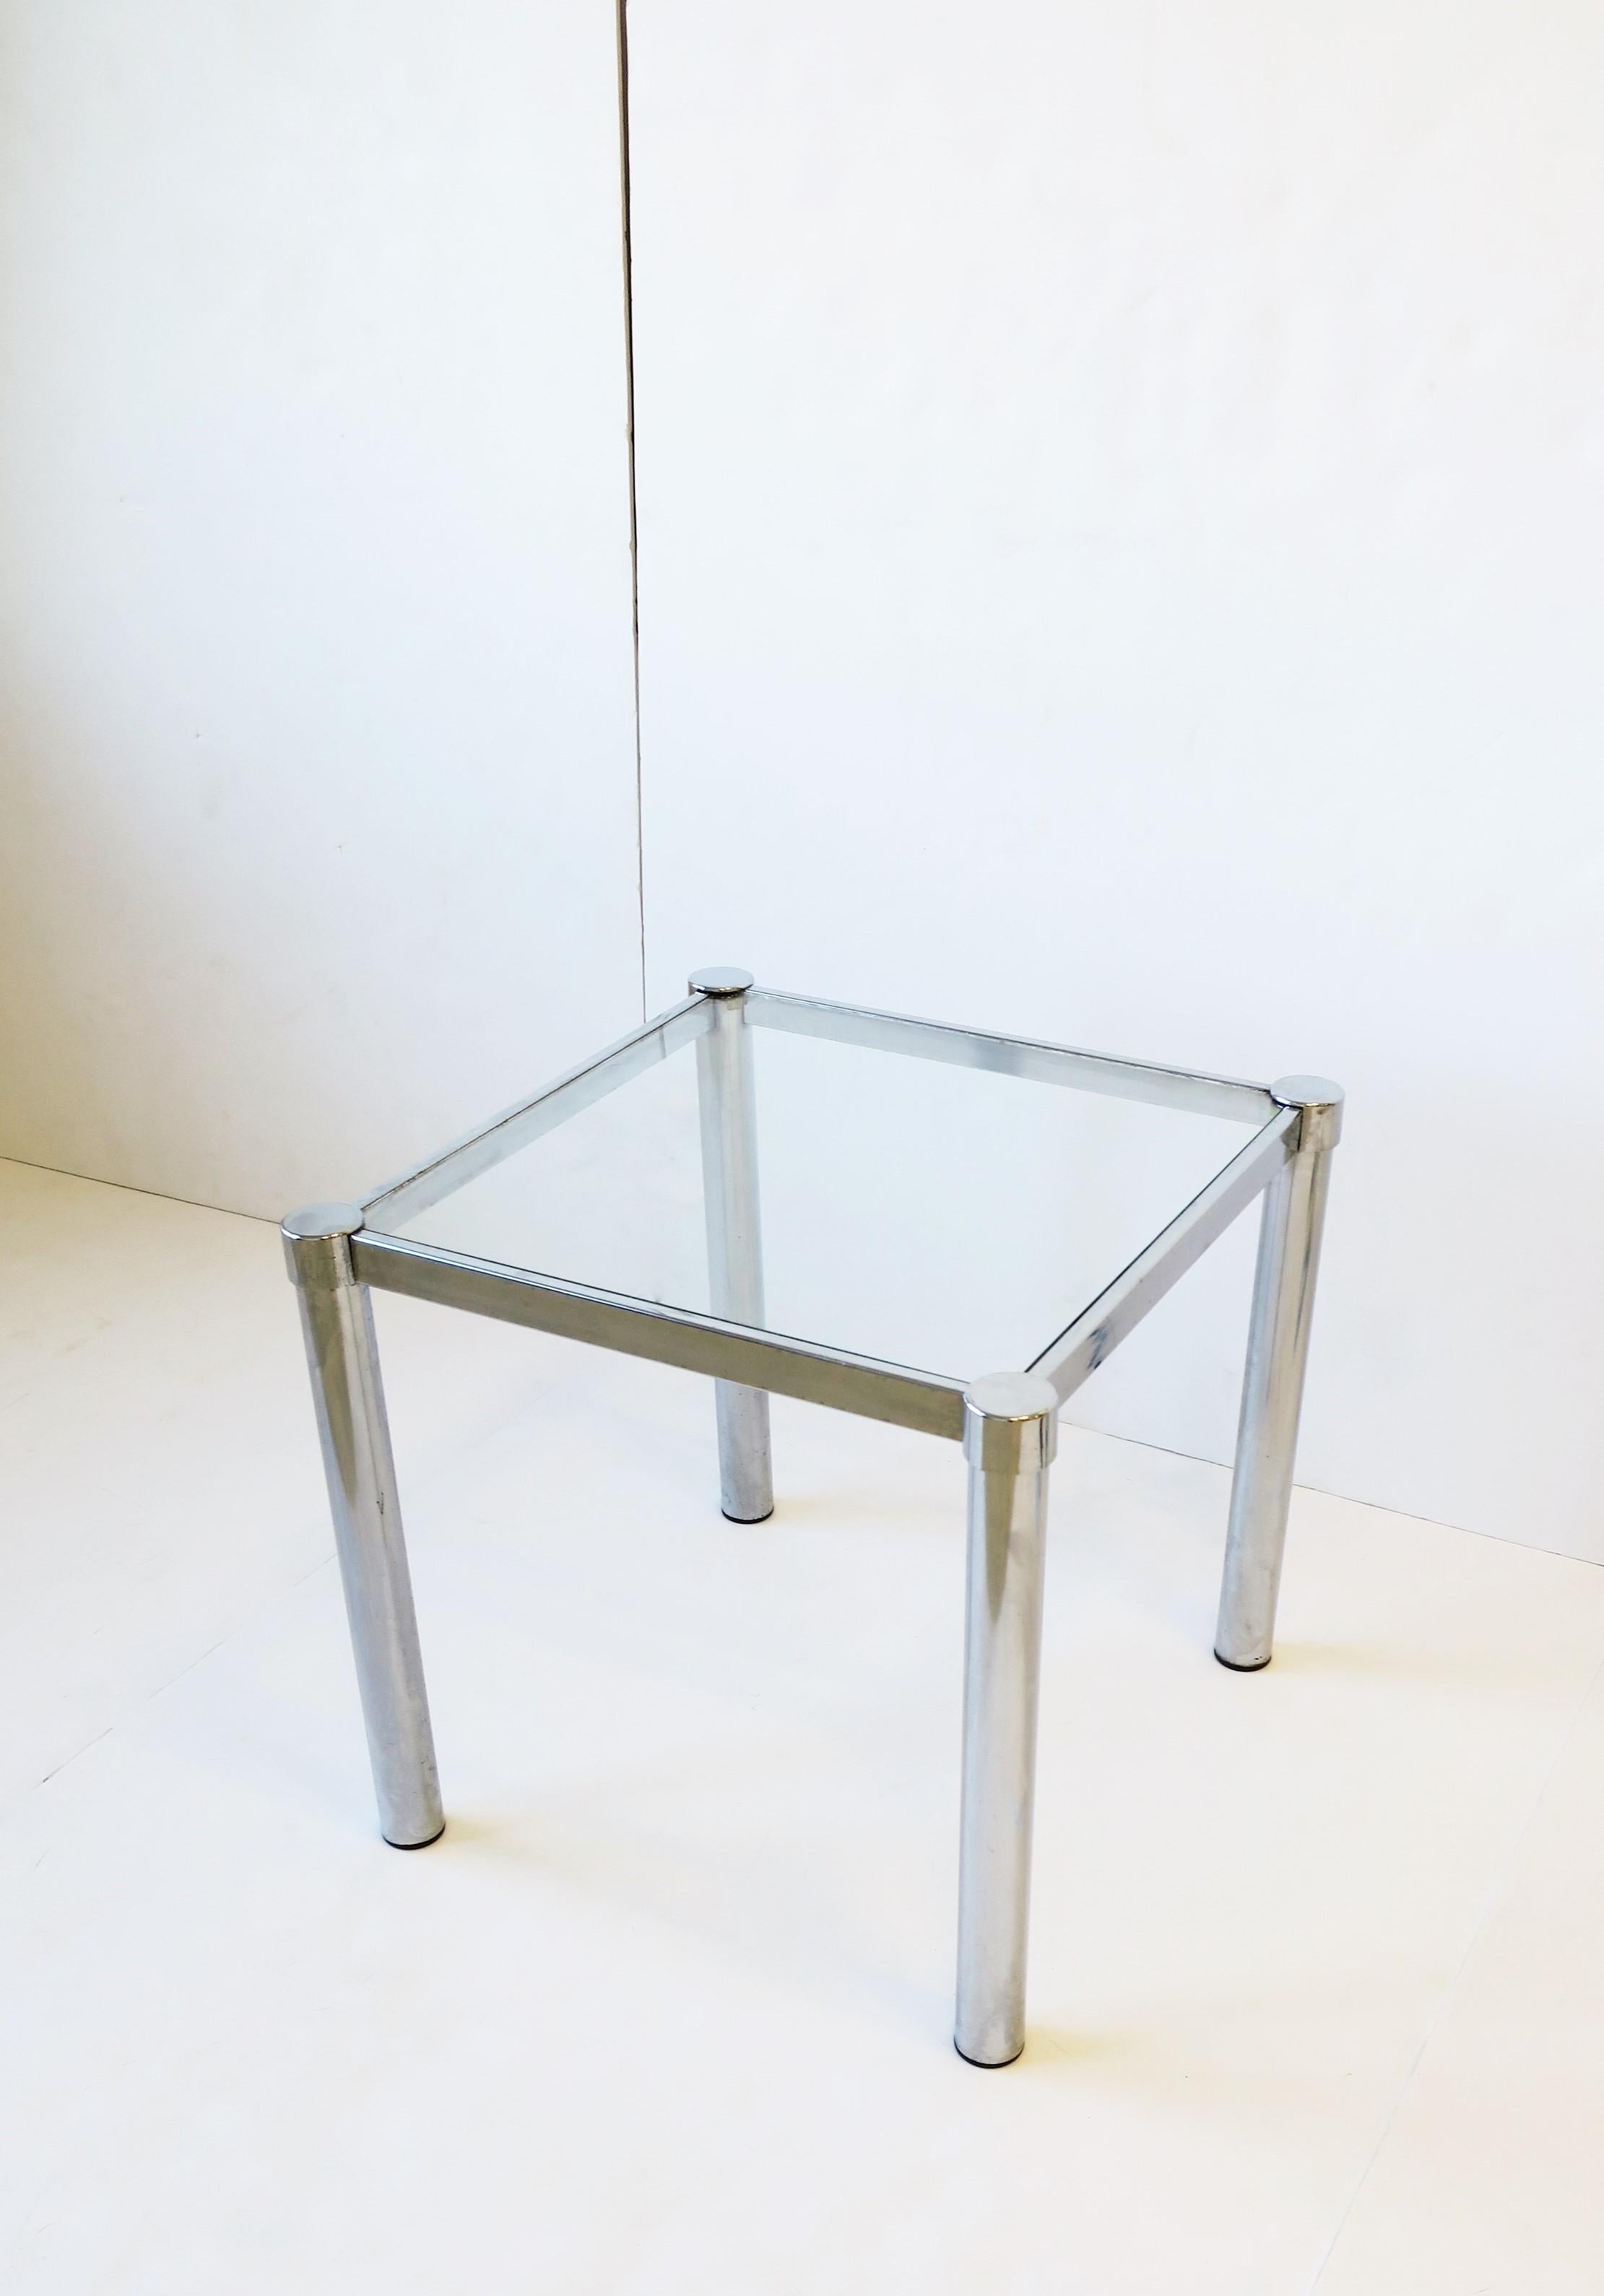 A Postmodern tubular chrome and glass end or side table, circa 1970s modern or Postmodern period. Base frame is square with tubular chrome legs, and a glass top that's fitted into base frame. Table is convenient size; Dimensions: 16